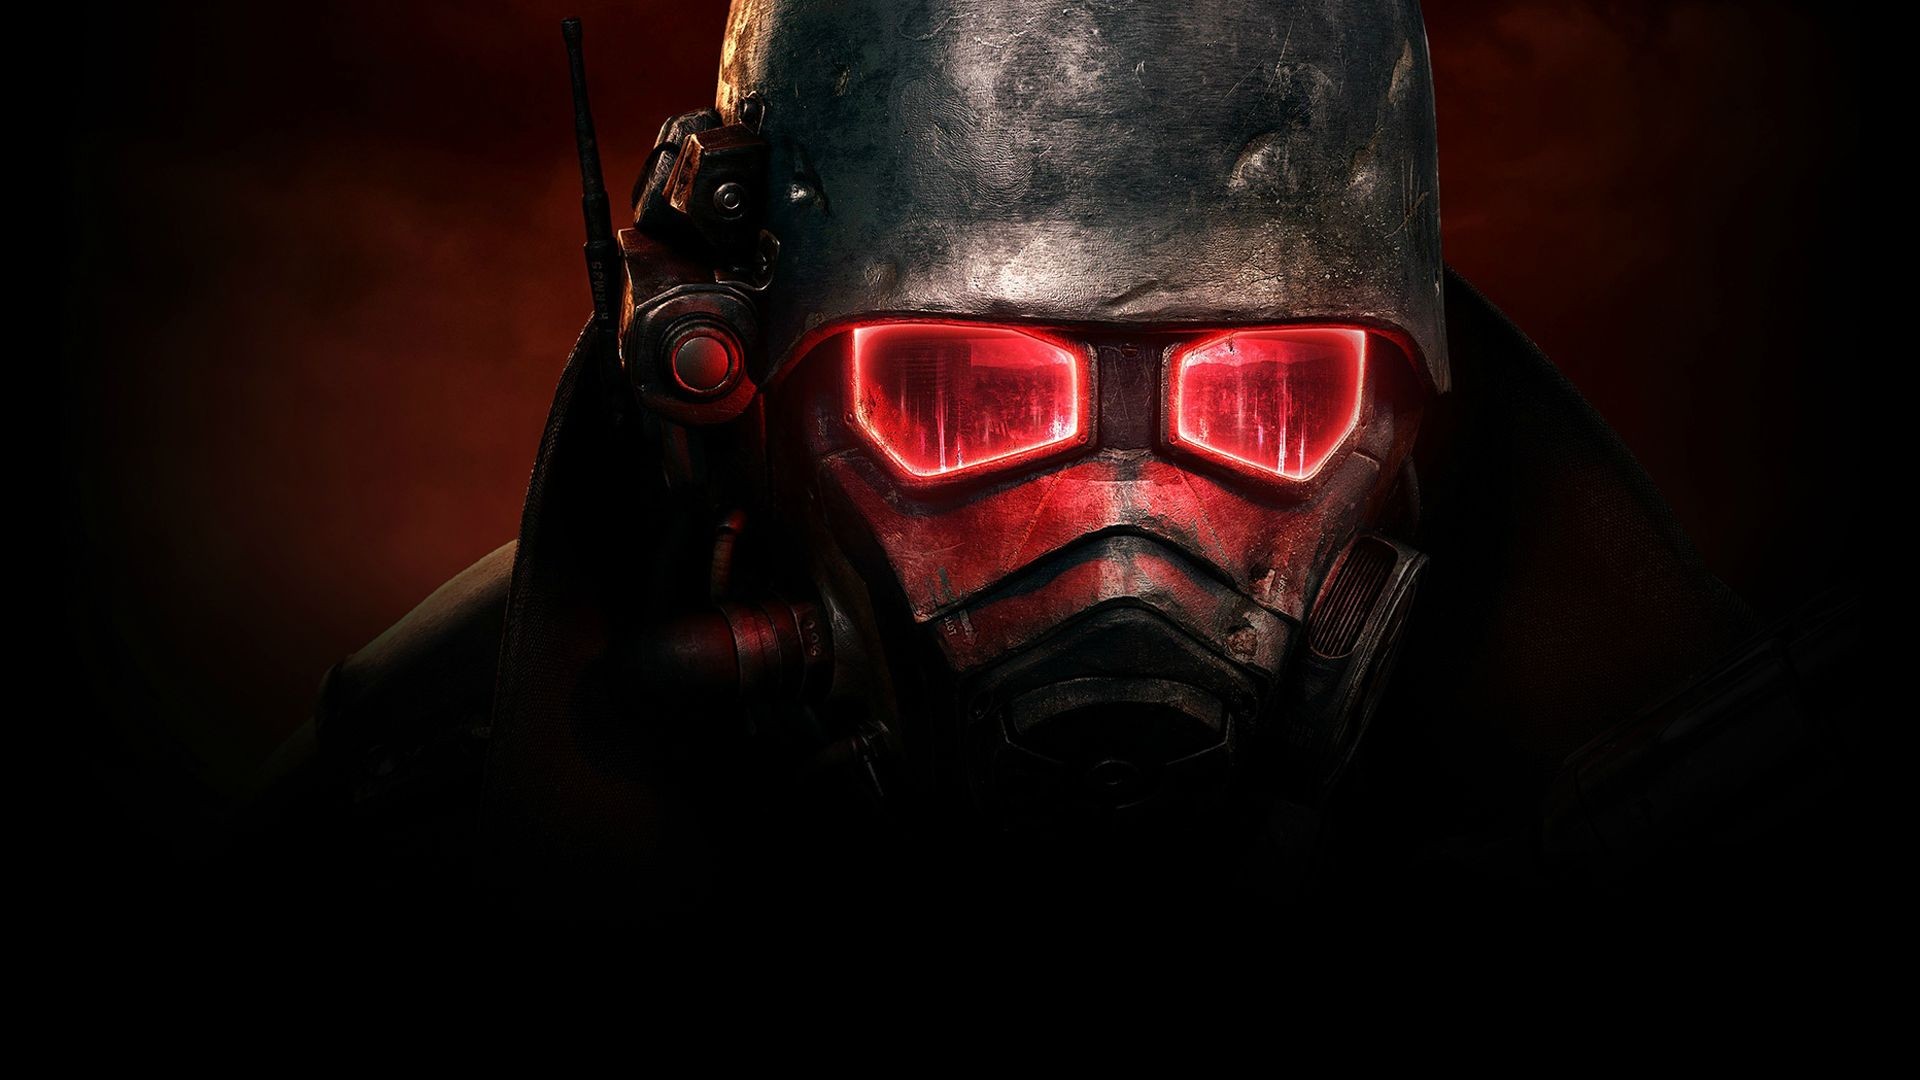 General 1920x1080 Fallout video games video game art red eyes armor dark PC gaming